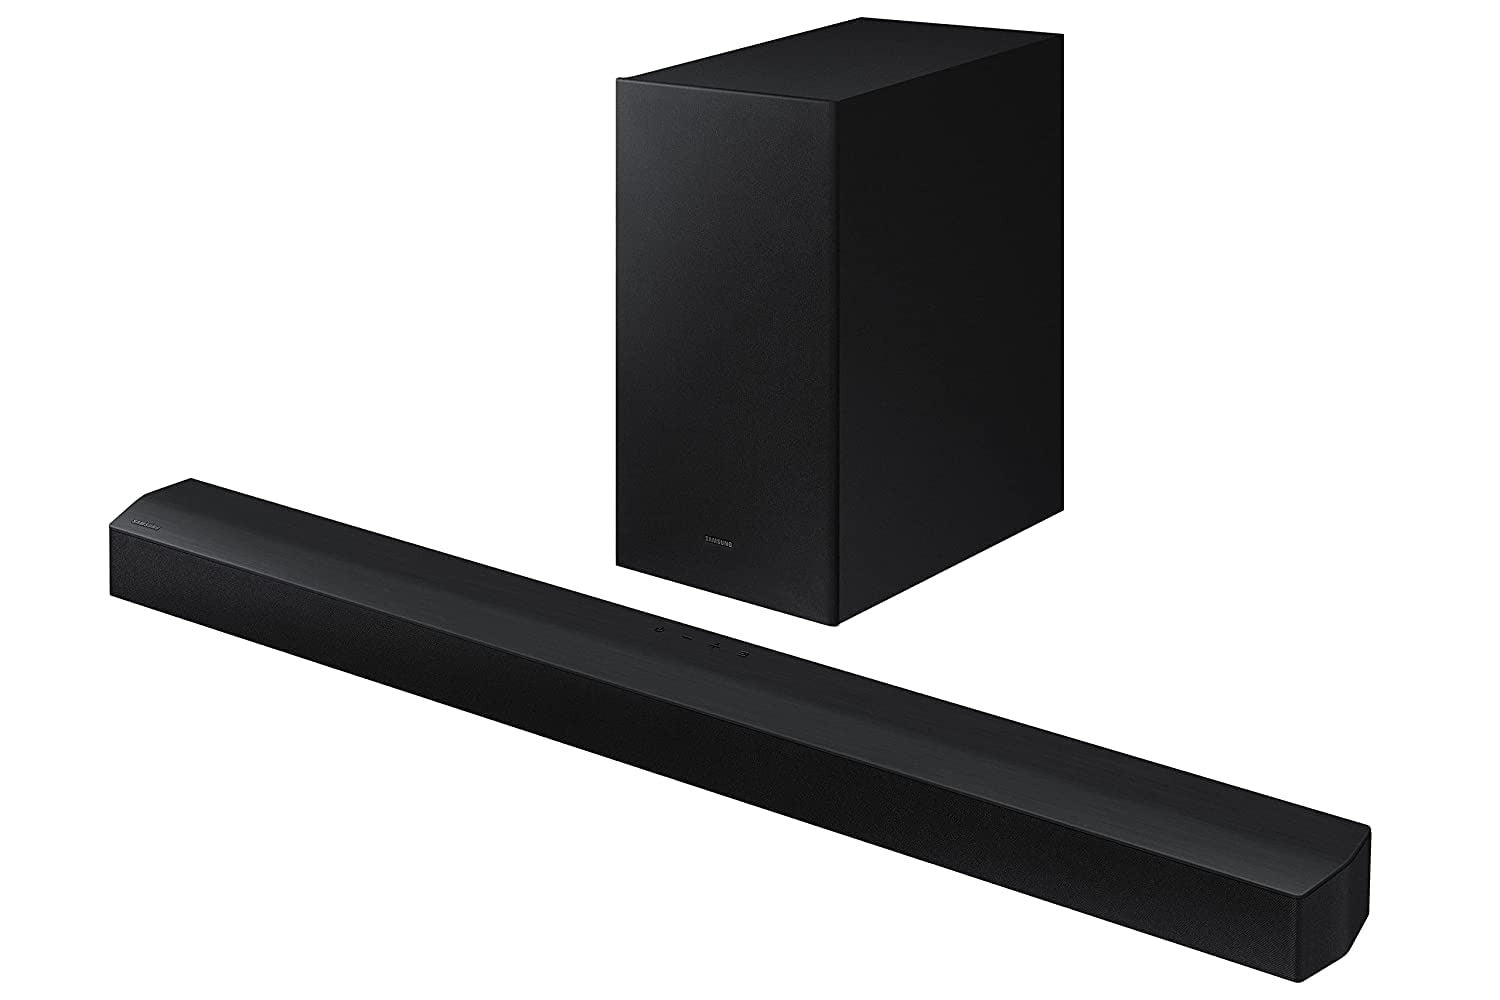 Open Box, Unused SAMSUNG (HW-B45E/XL) with 3 speakers,Wireless Subwoofer and Dolby 3D and Soundbar